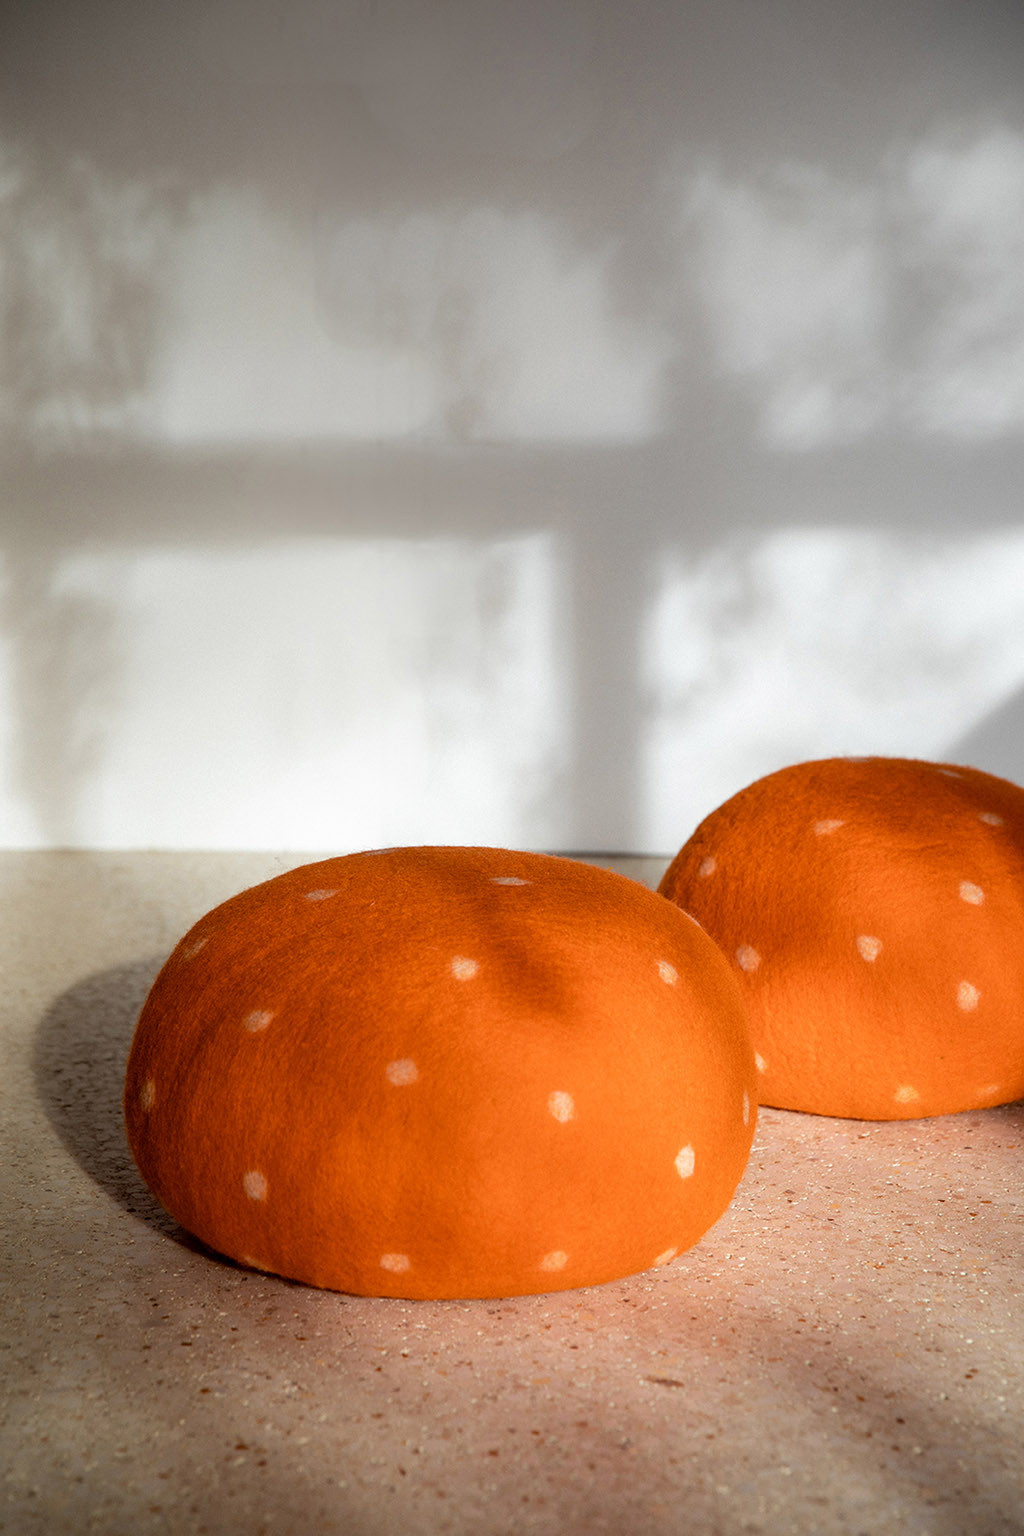 Two orange felted wool poufs reminiscent of mushrooms